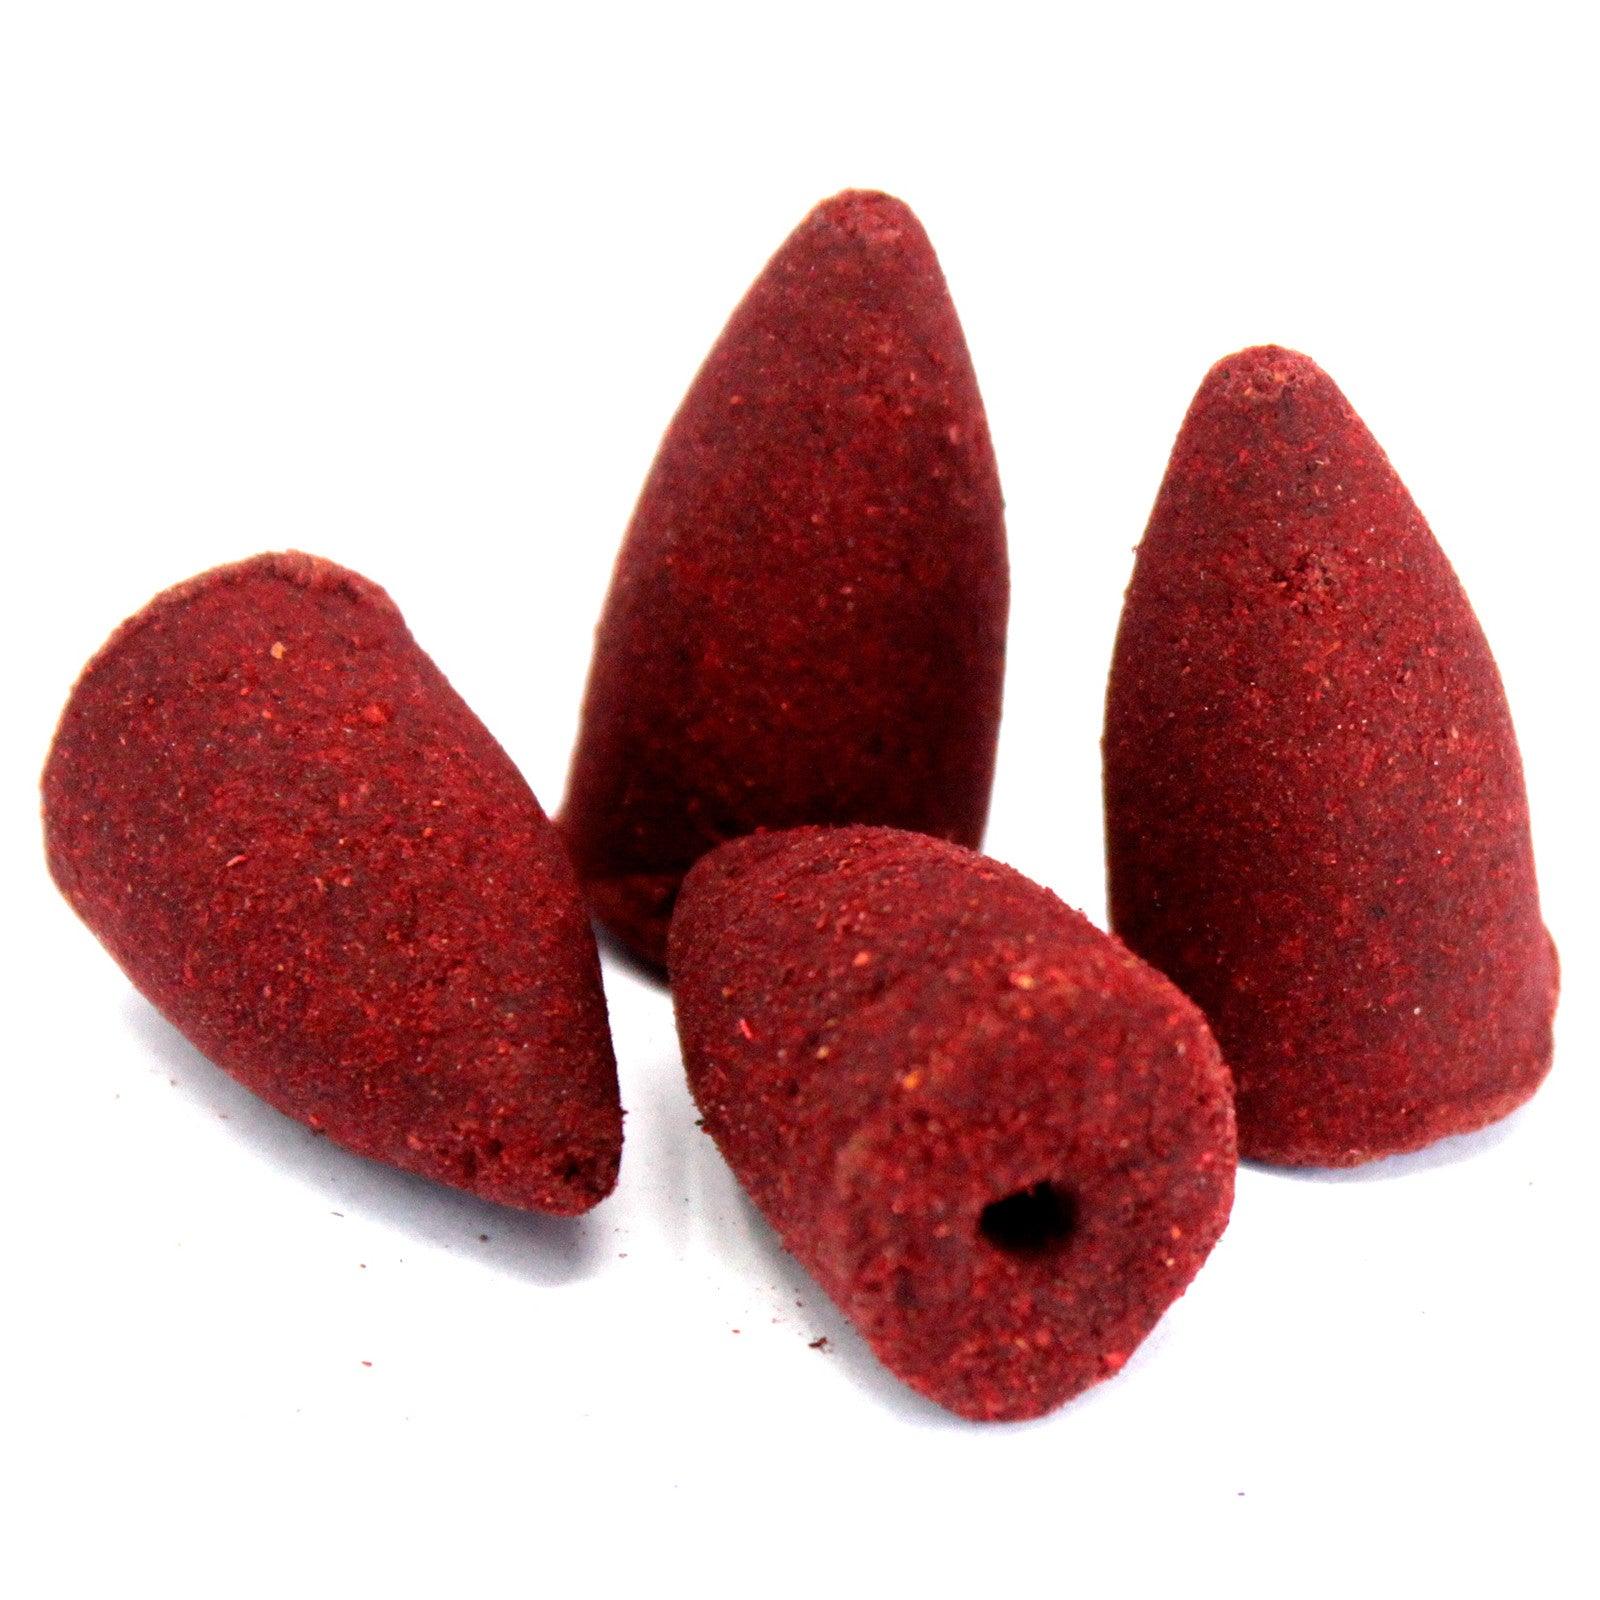 Aromatica Backflow Incense Cones - Dragons Blood - Charming Spaces